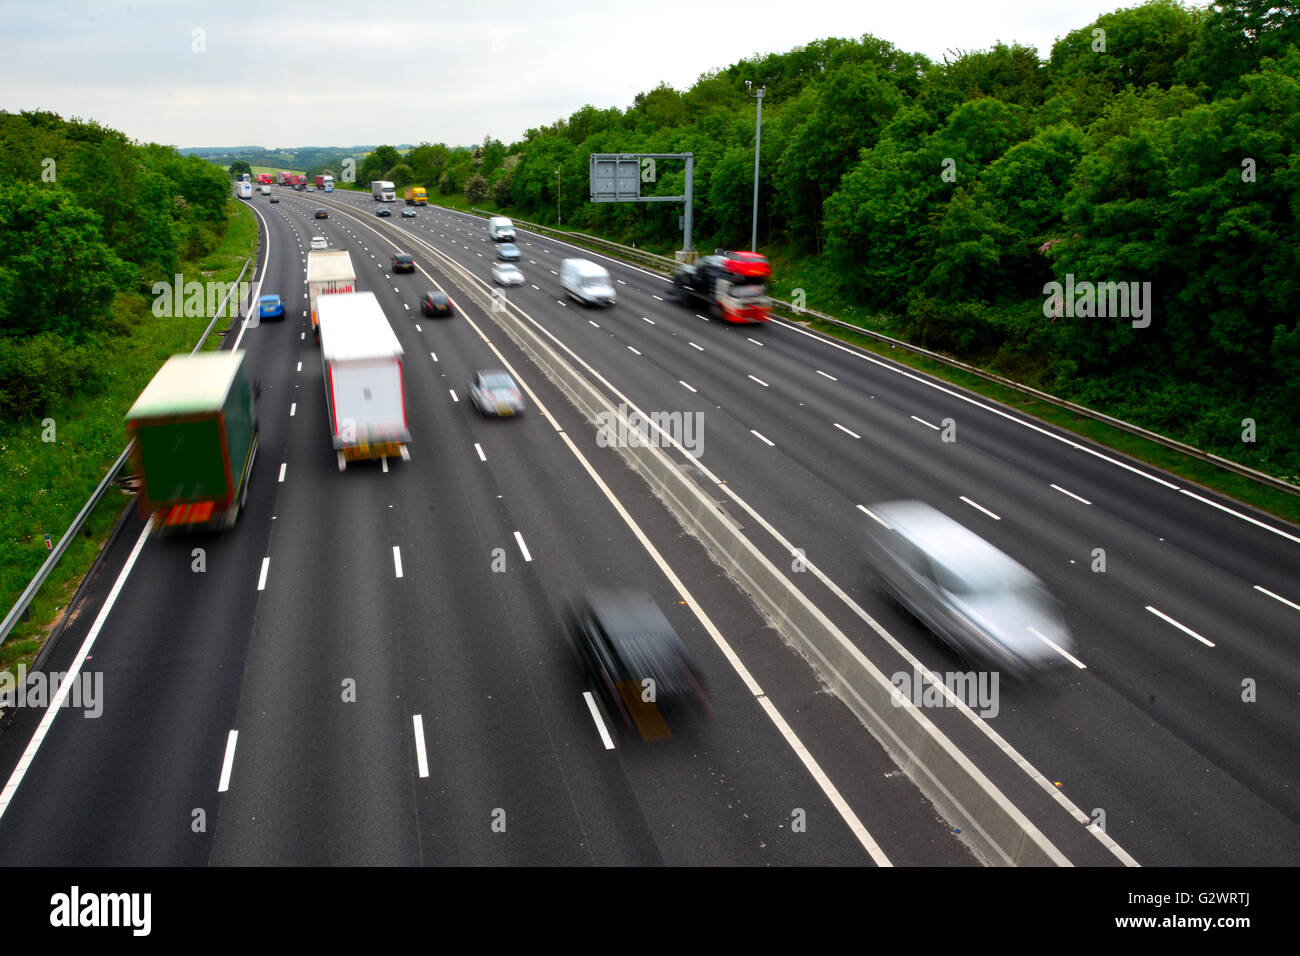 A four lane Smart motorway in the UK Stock Photo